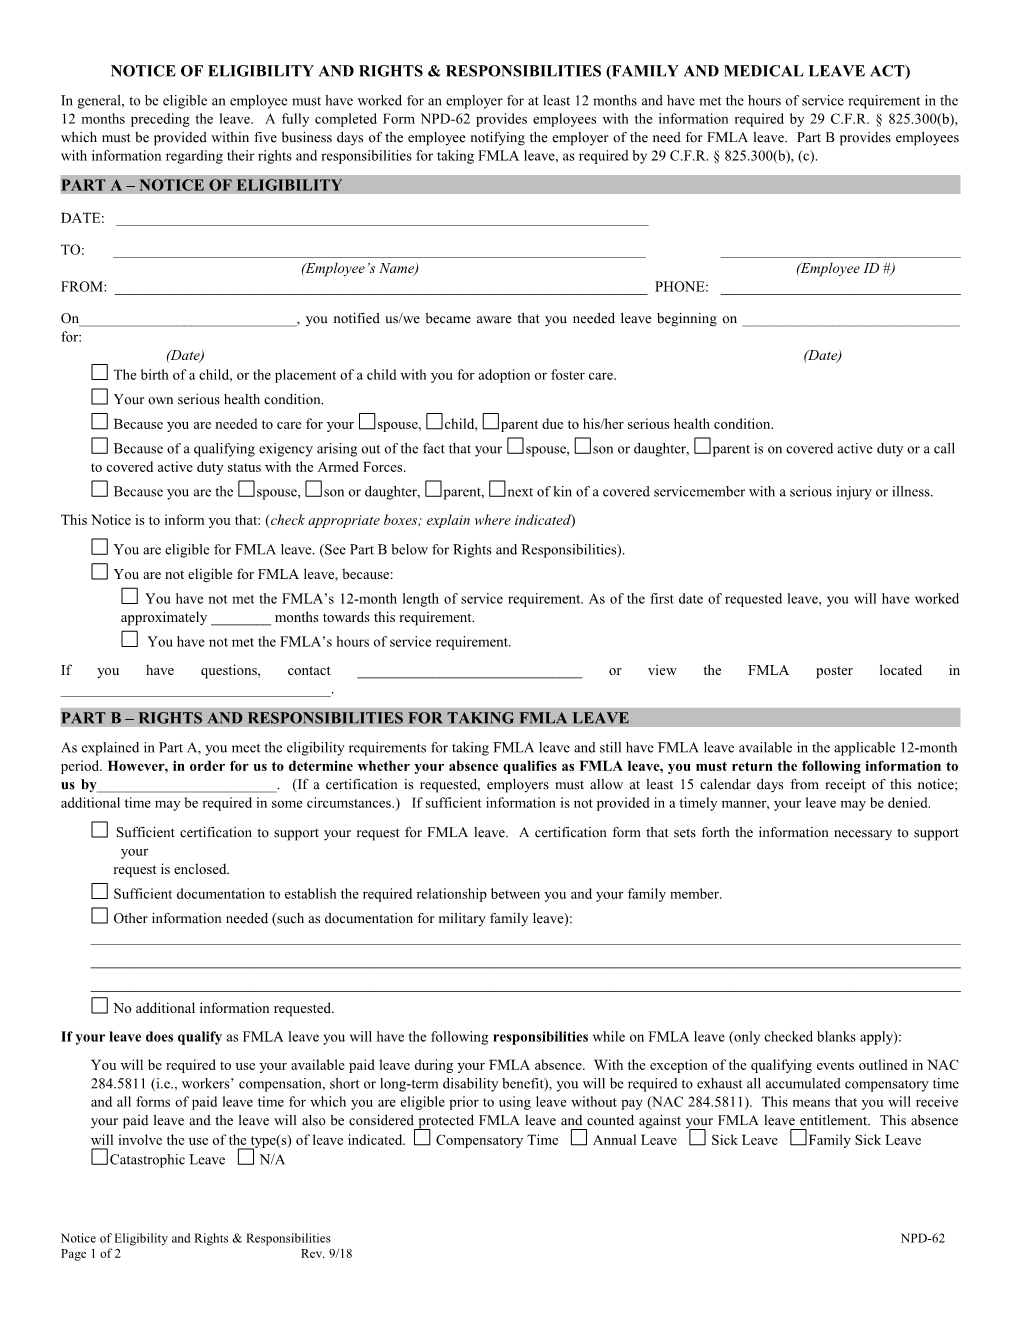 Notice of Eligibility and Rights & Responsibilities (Family and Medical Leave Act)